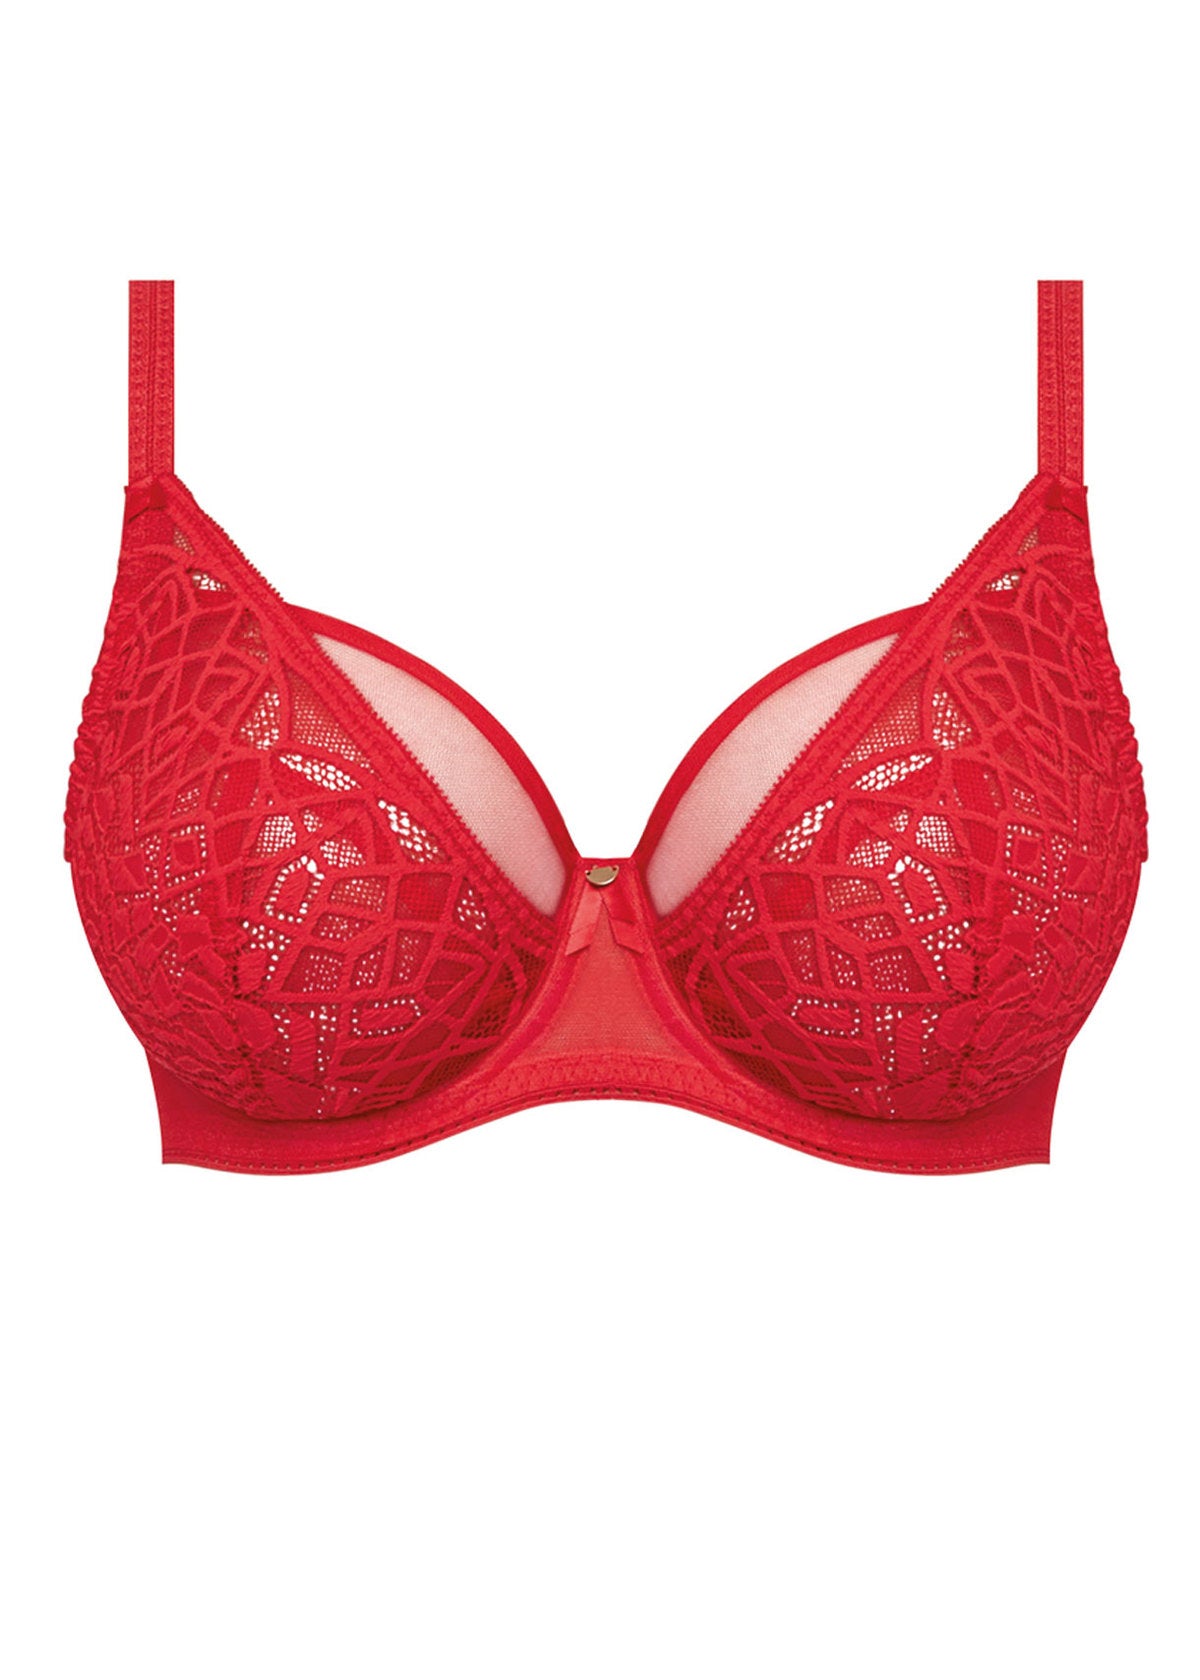 Freya Lingerie Soiree Lace Padded bra E-H cup –